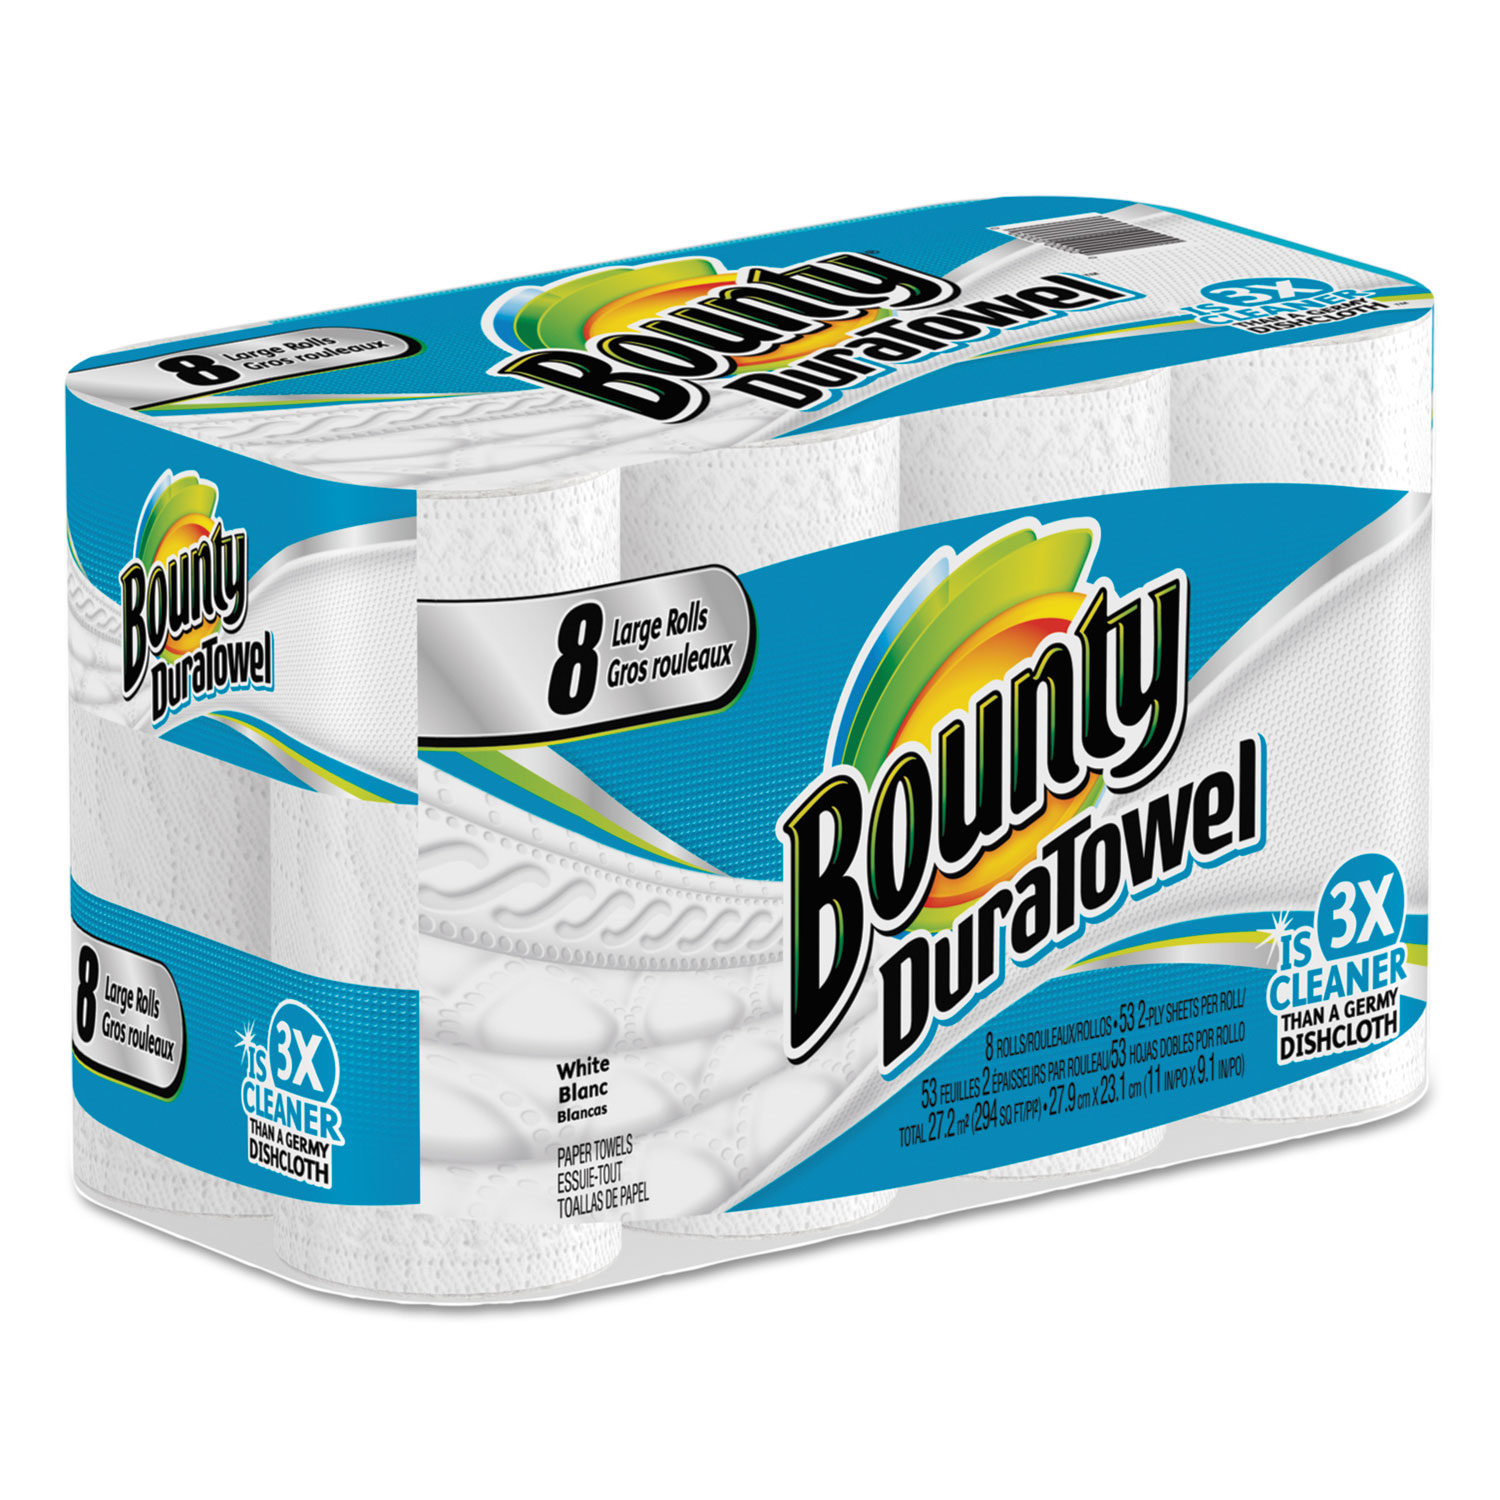 DuraTowel Paper Towels, 2-Ply, 9 x 11, 53/Roll, 8 Roll/Pack